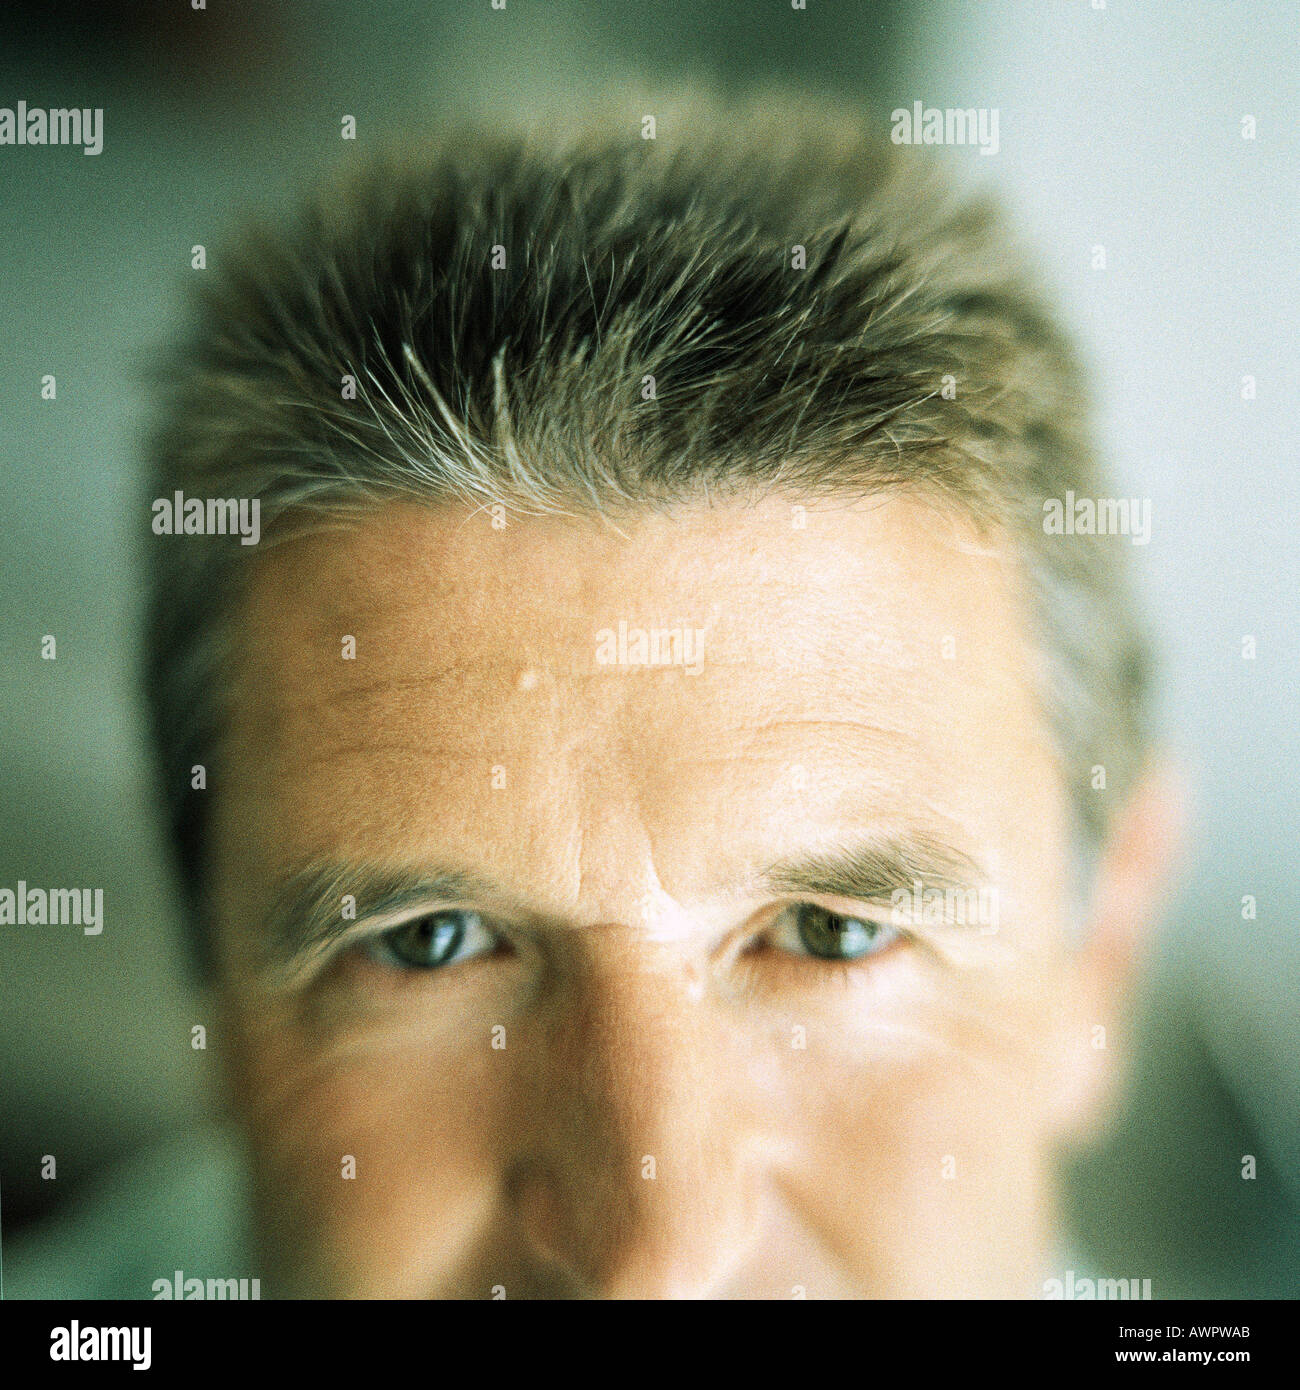 Partial view of man's face Stock Photo